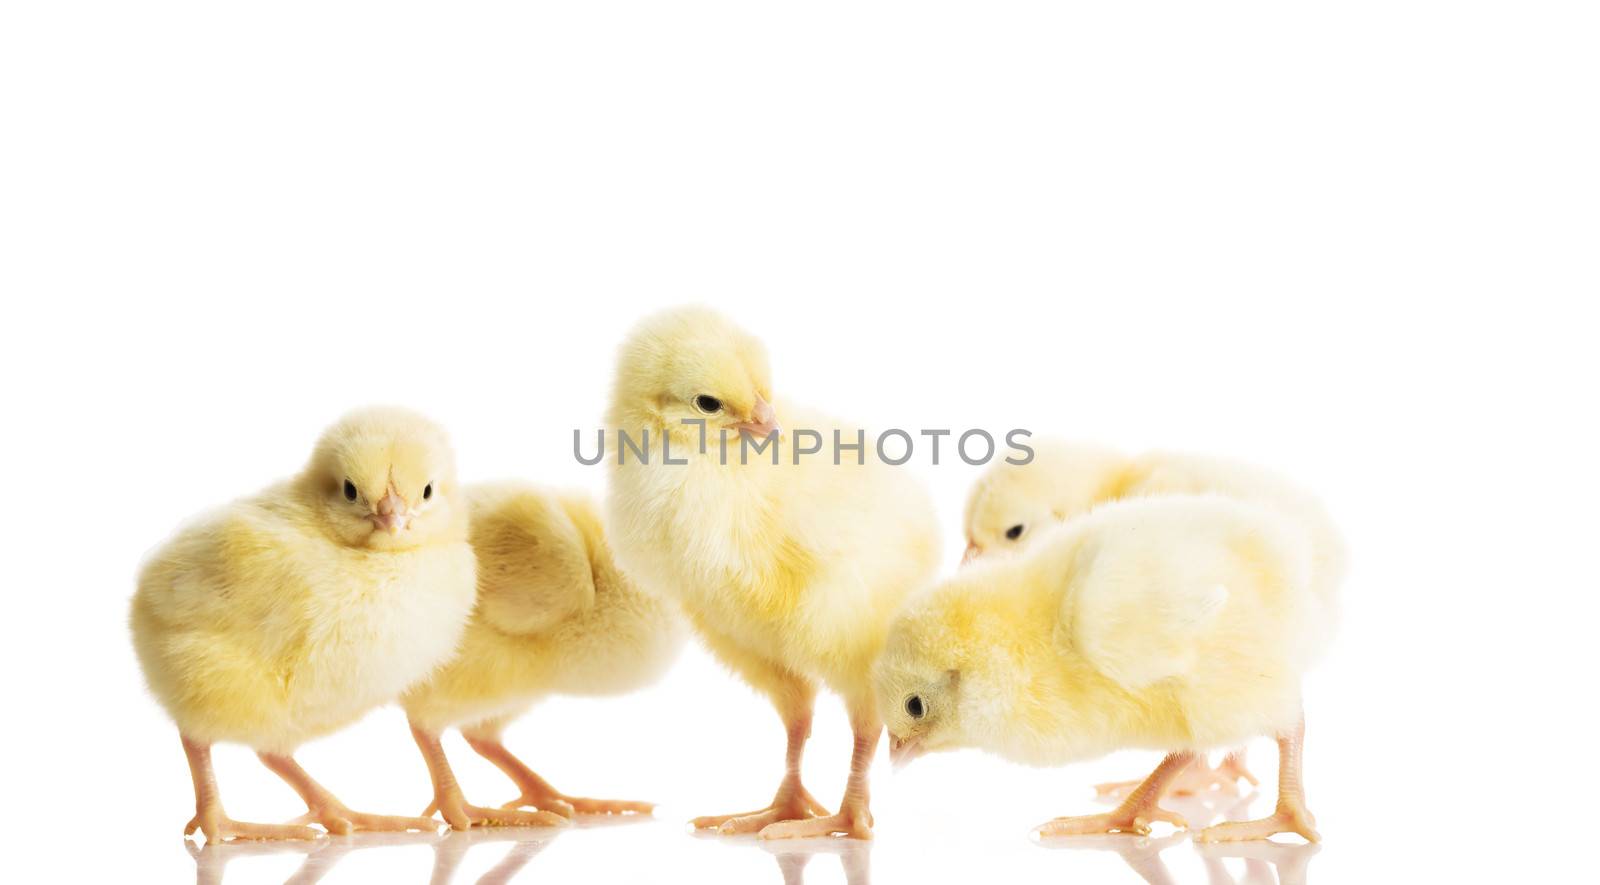 Group of small chicken. Isolated on white.